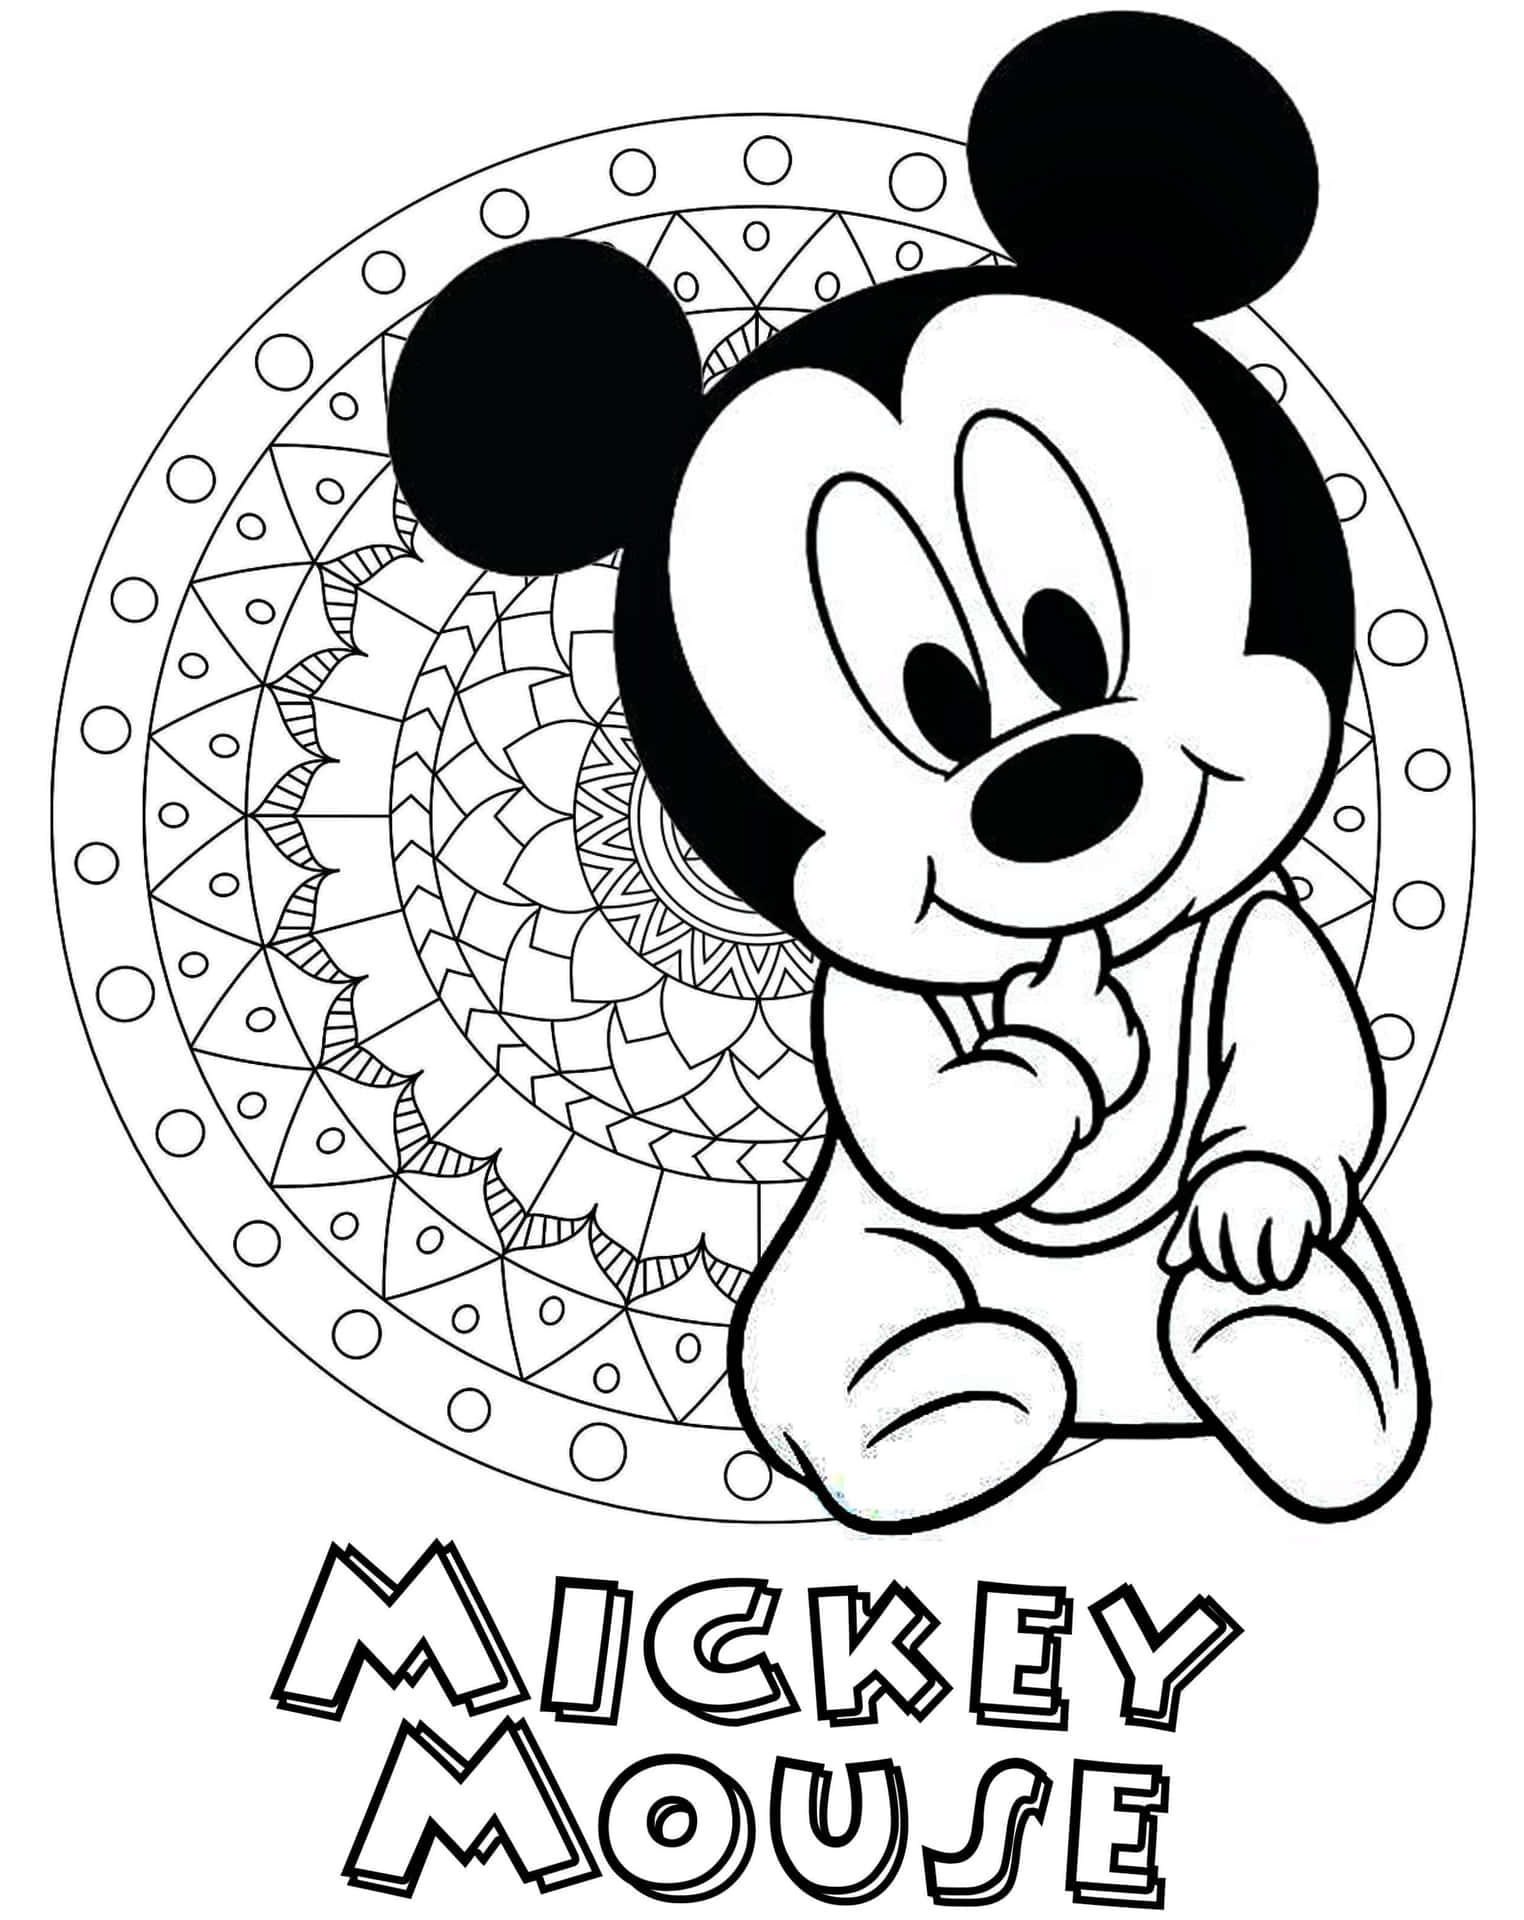 Download : Explore the world of Mickey Mouse with this fun and entertaining  colouring page